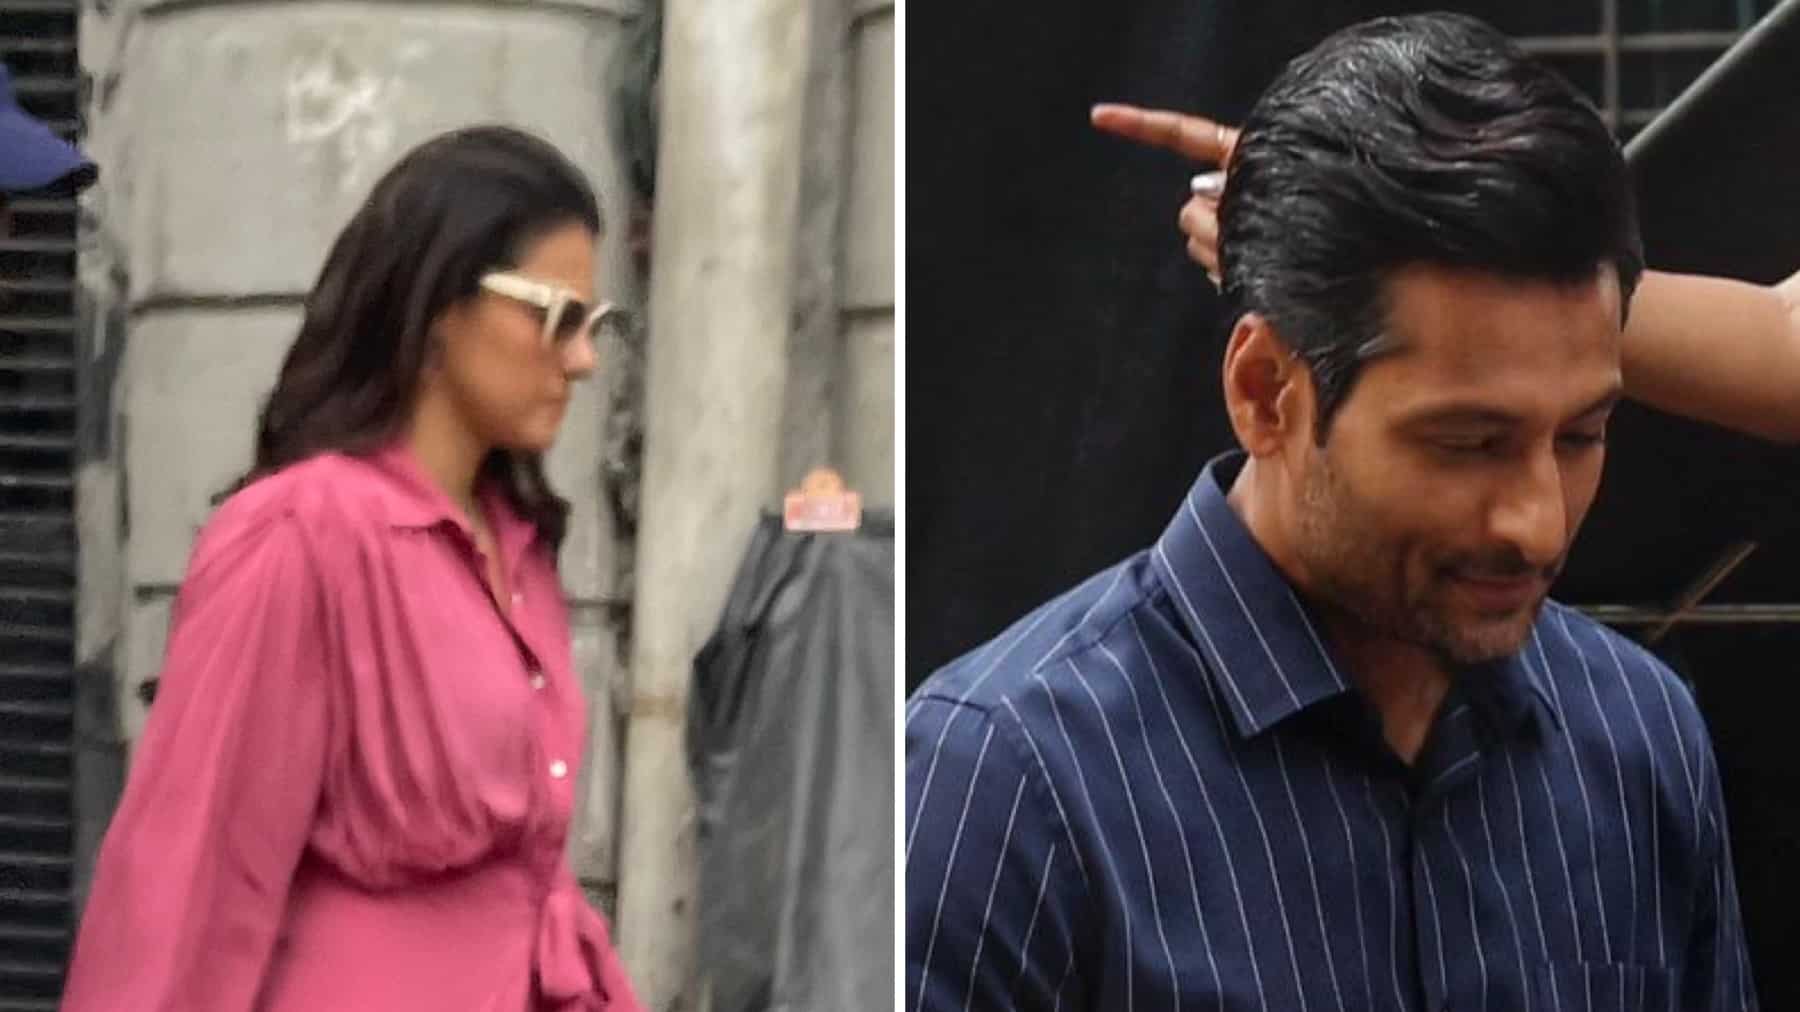 https://www.mobilemasala.com/film-gossip/Kajol-and-Indraneil-Sengupta-spotted-shooting-in-Kolkata-Check-out-the-pics-here-i251711